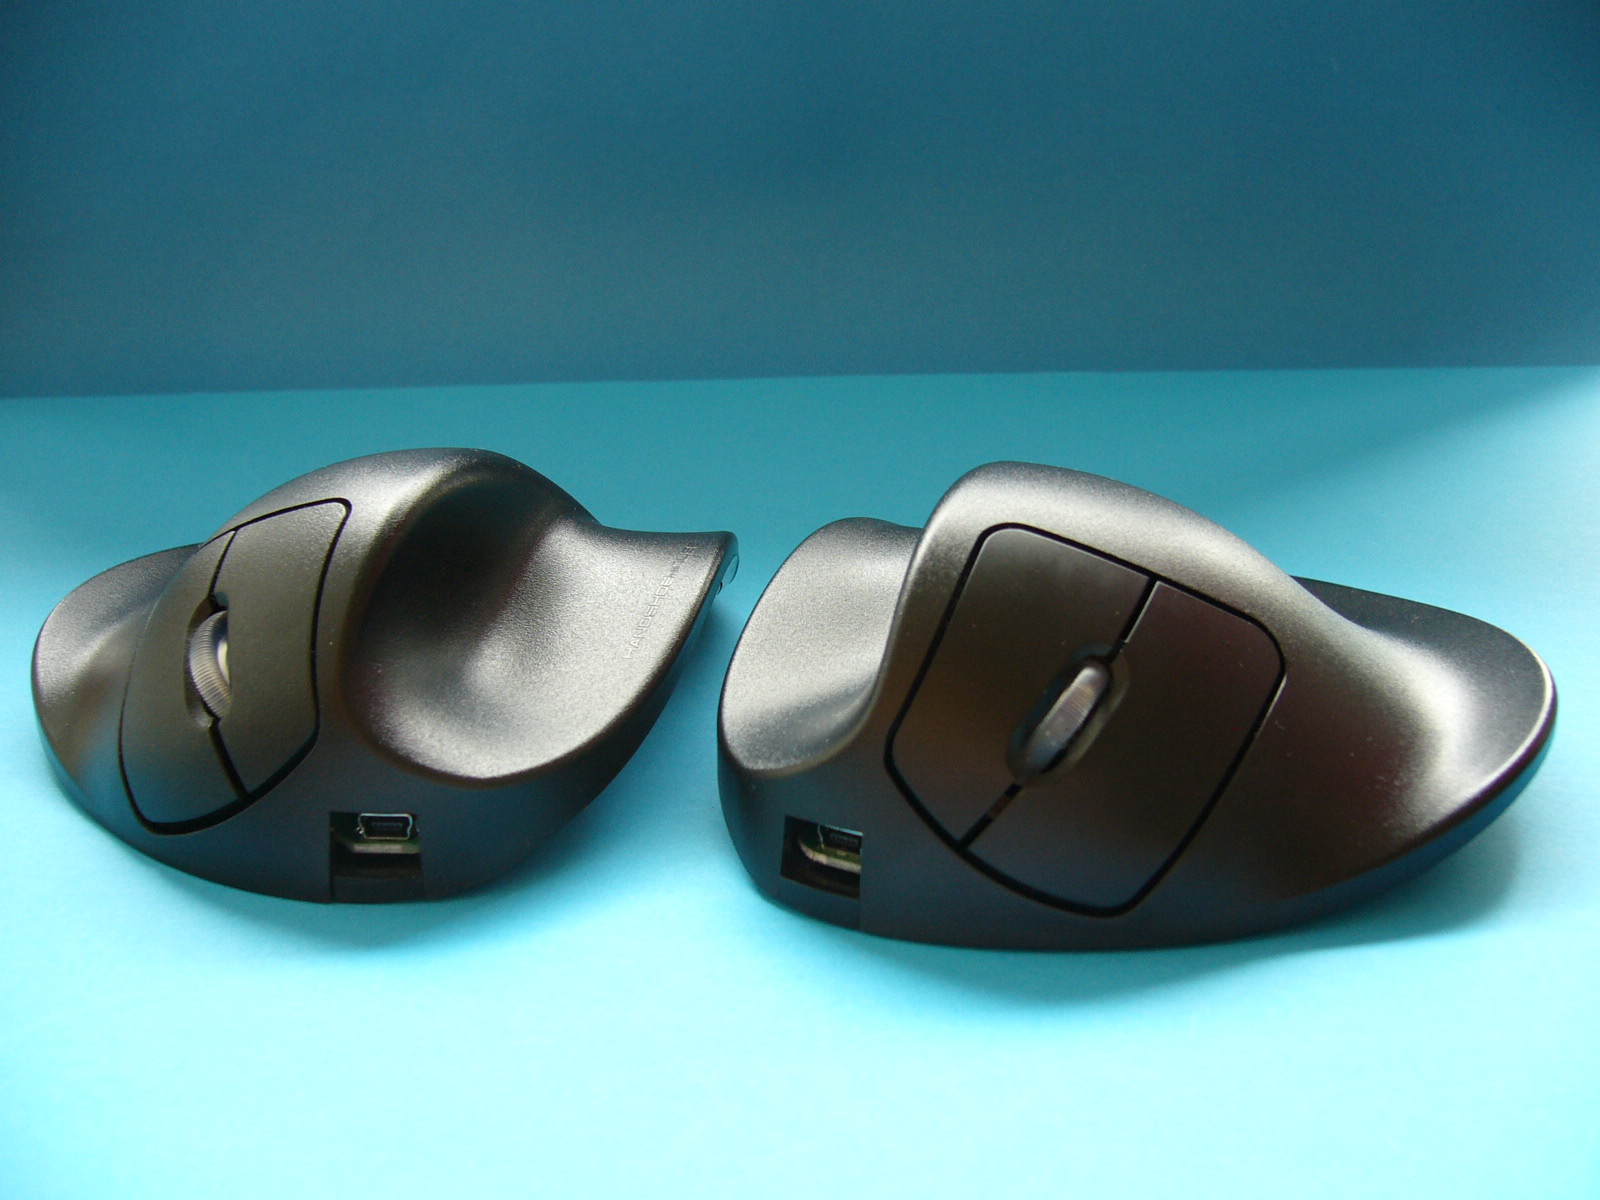 Review: Logitech's Lift vertical mouse helps control RSI